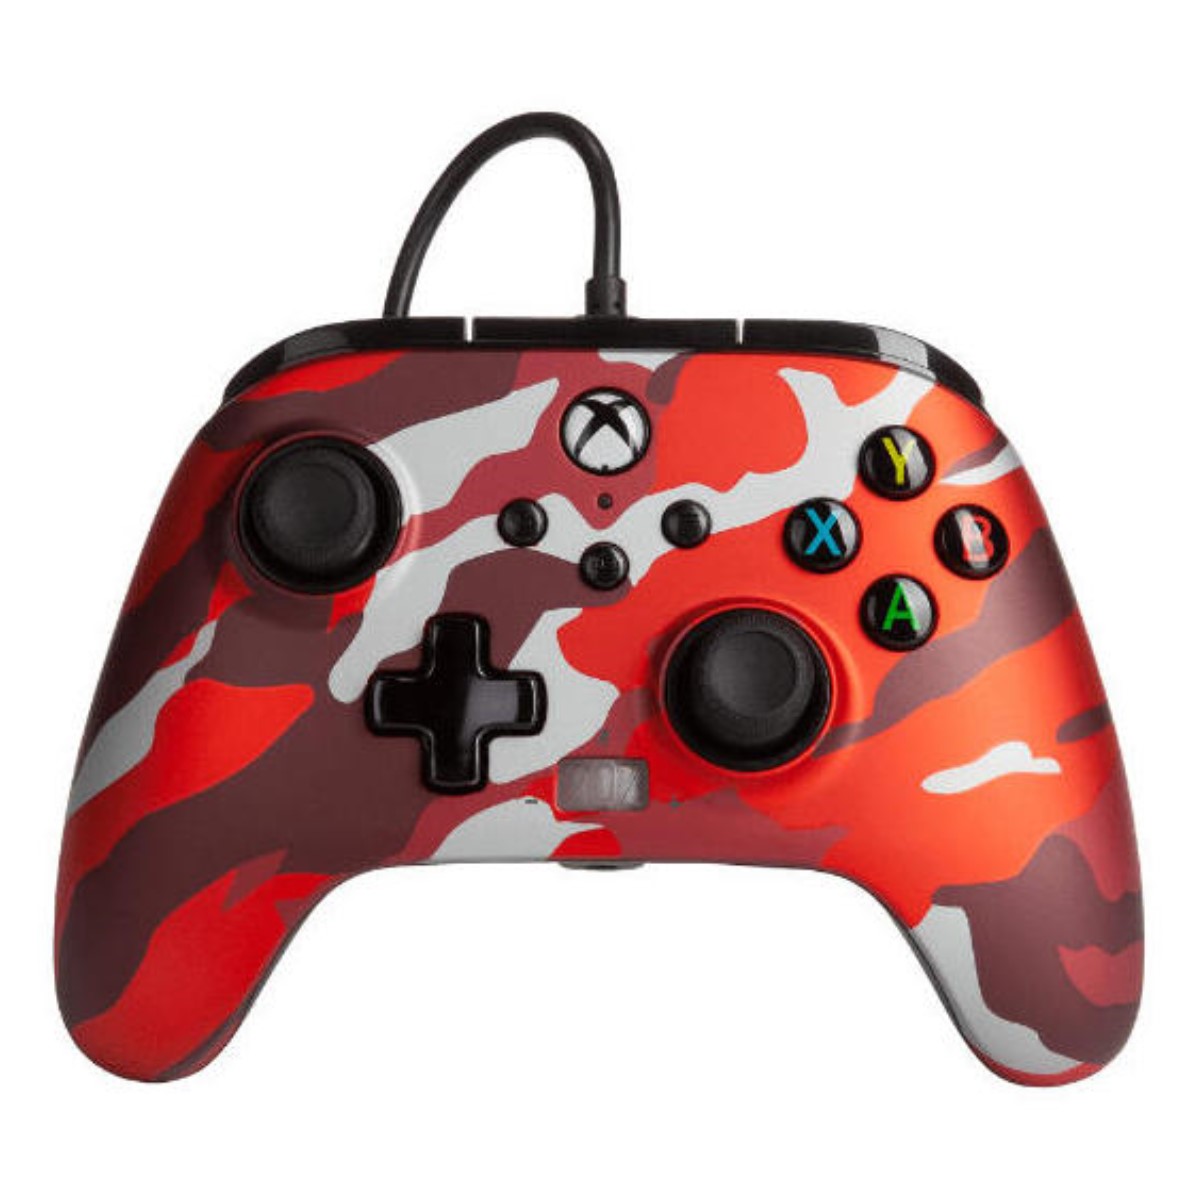 Contrôle des jeux XBOX ENHANCED WIRED METALL Rouge